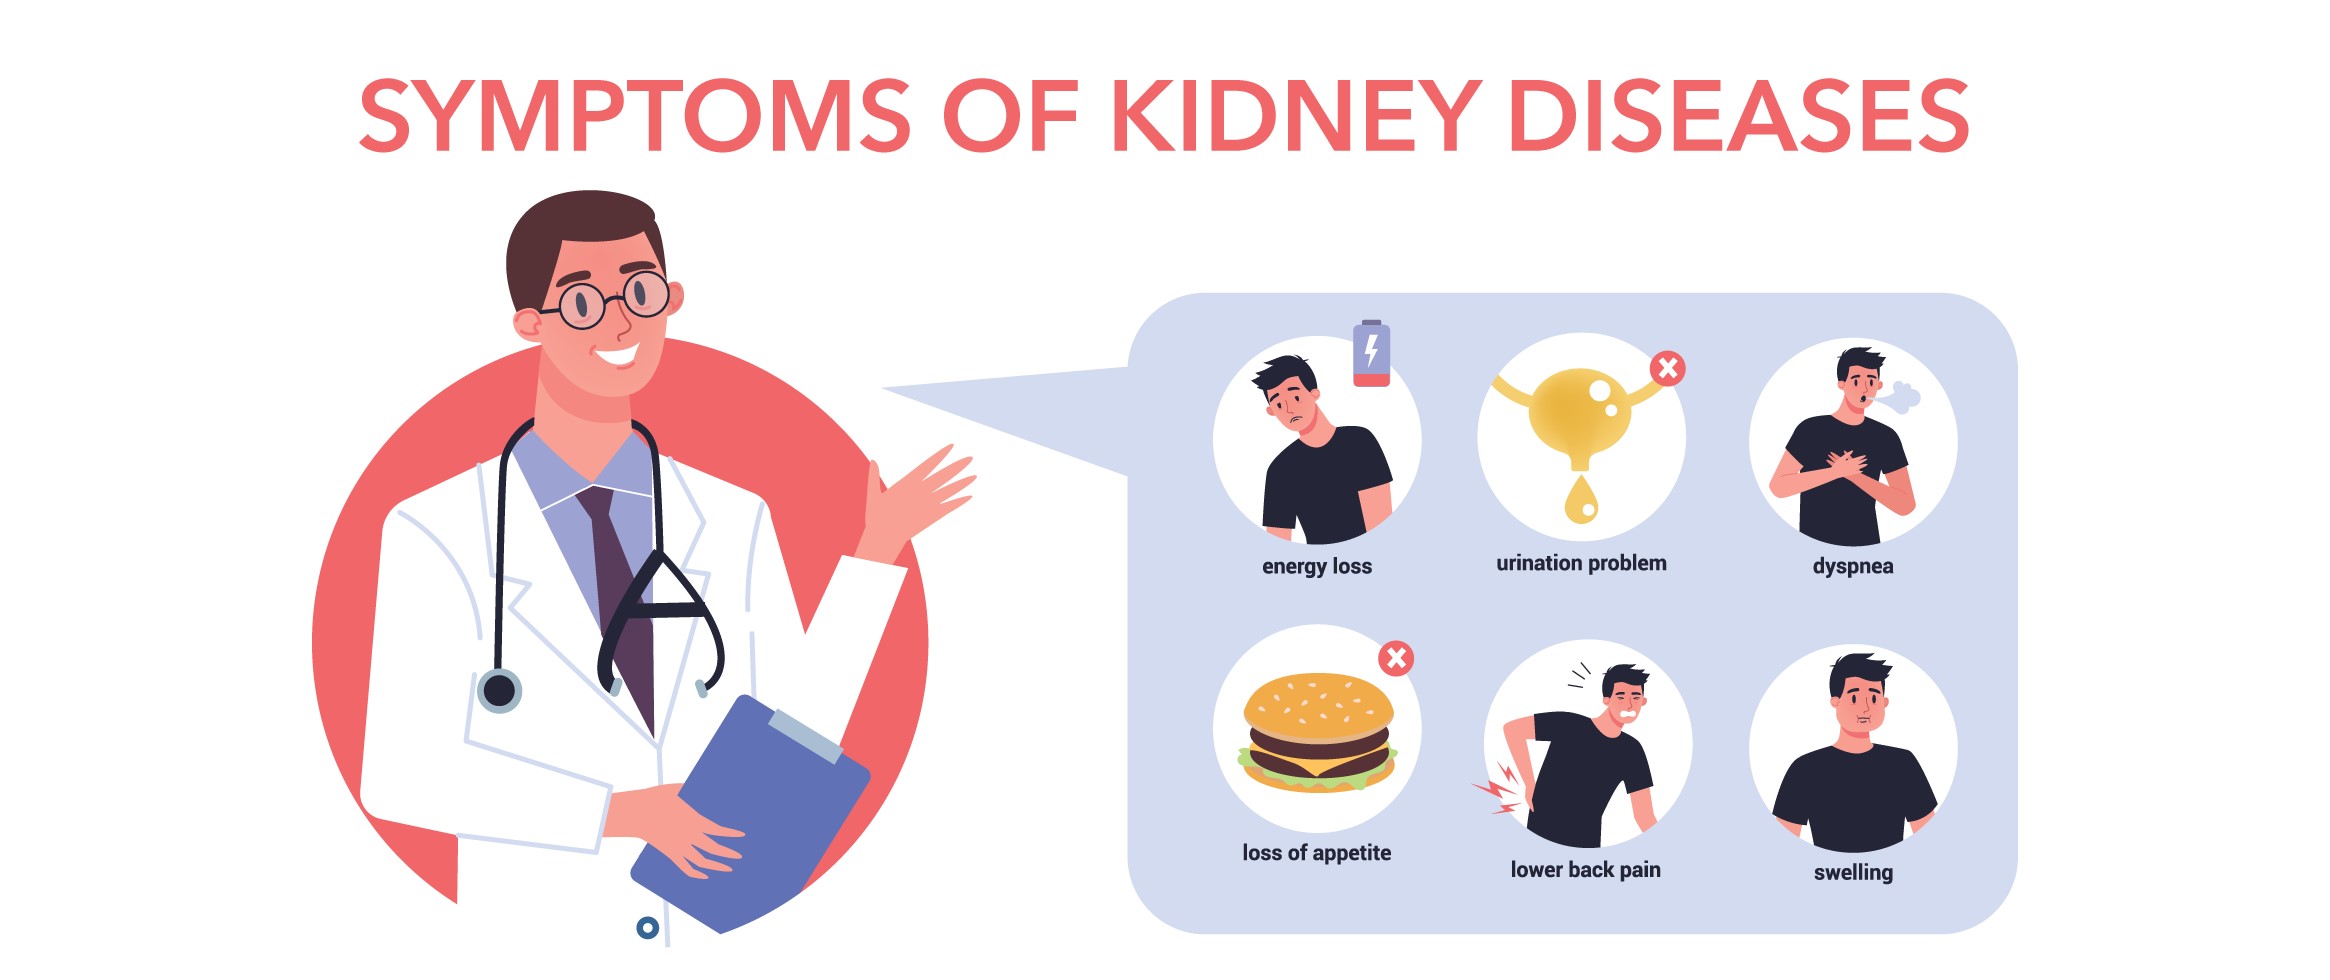 Symptoms and Effective Treatment of Kidney Disorders